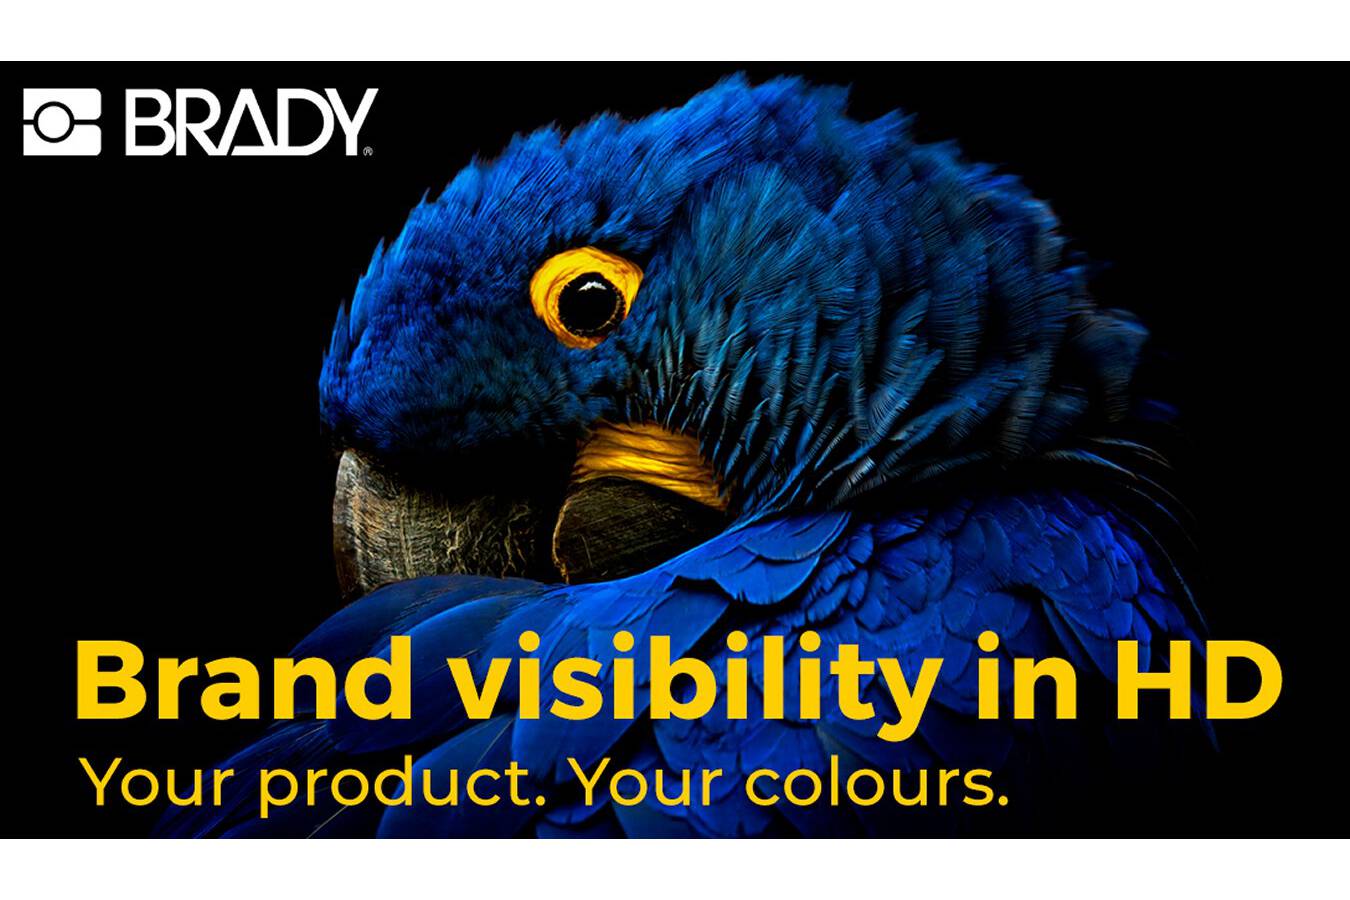  Get brand visibility in HD